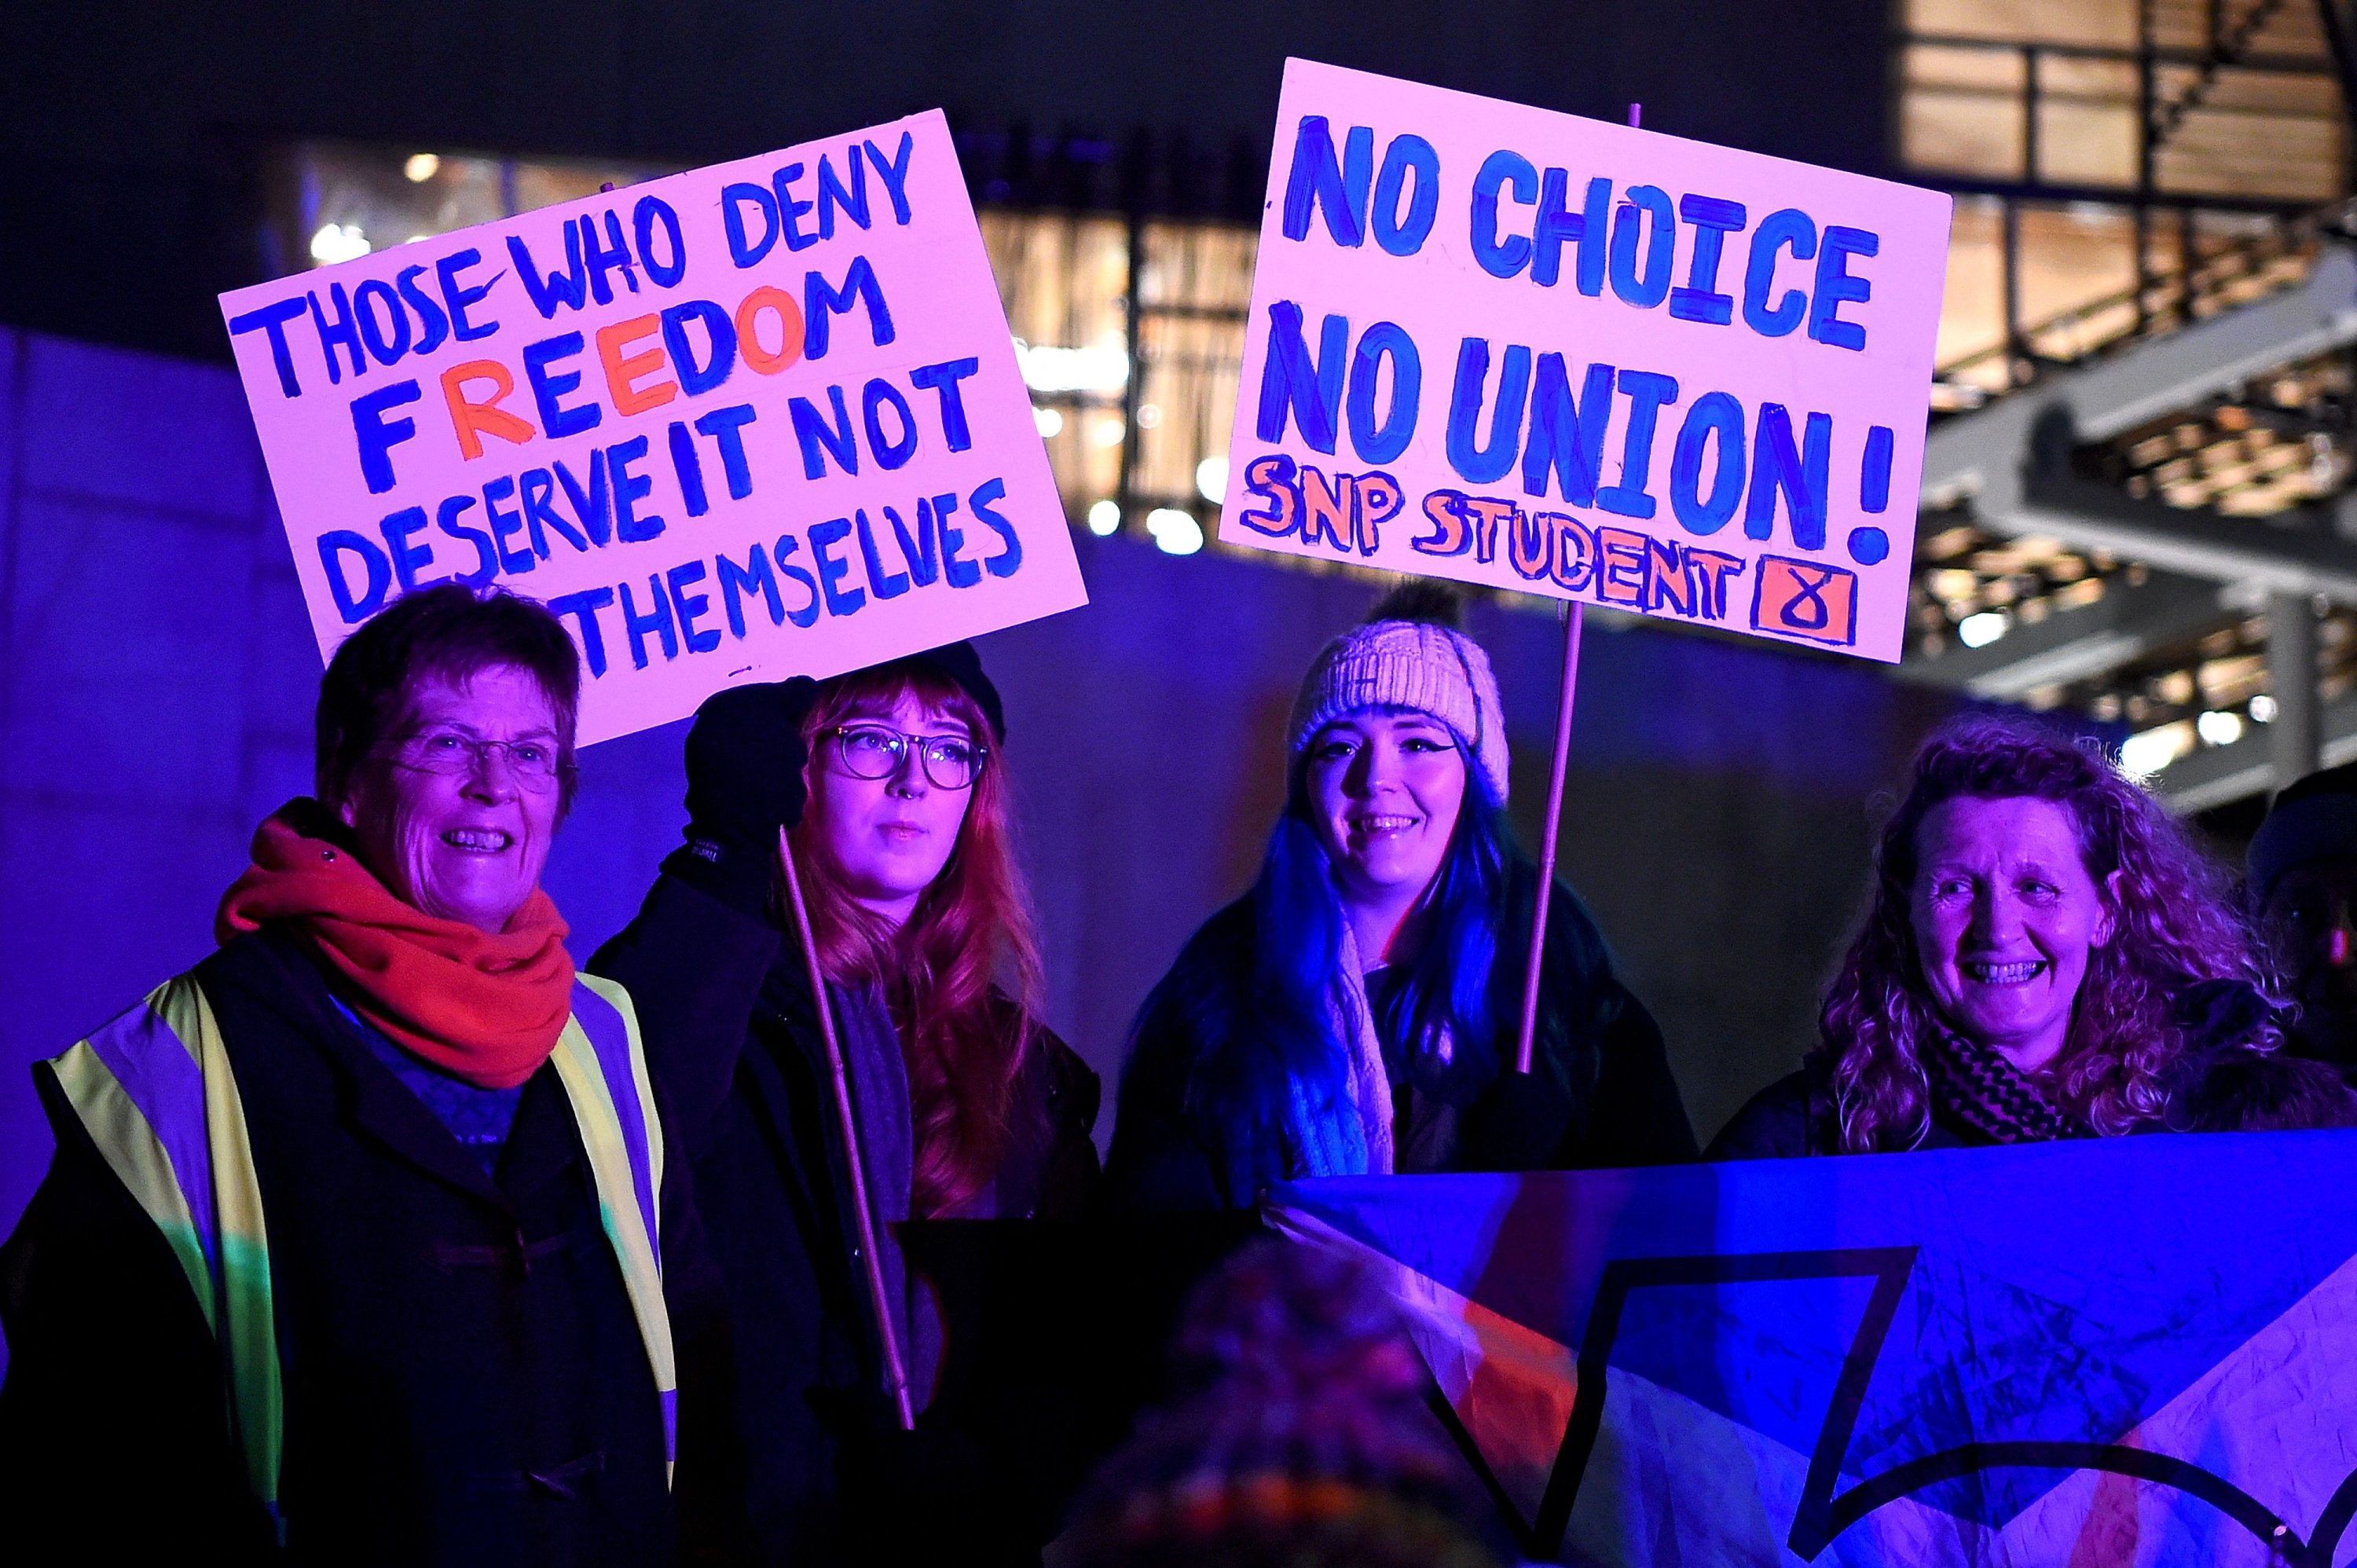 Demonstrators hold placards as they attend a pro-Scottish independence rally outside parliament in Edinburgh after the UK Supreme Court rejected Scottish independence vote plans, Edinburgh, Scotland, Nov. 23, 2022. (AFP Photo)